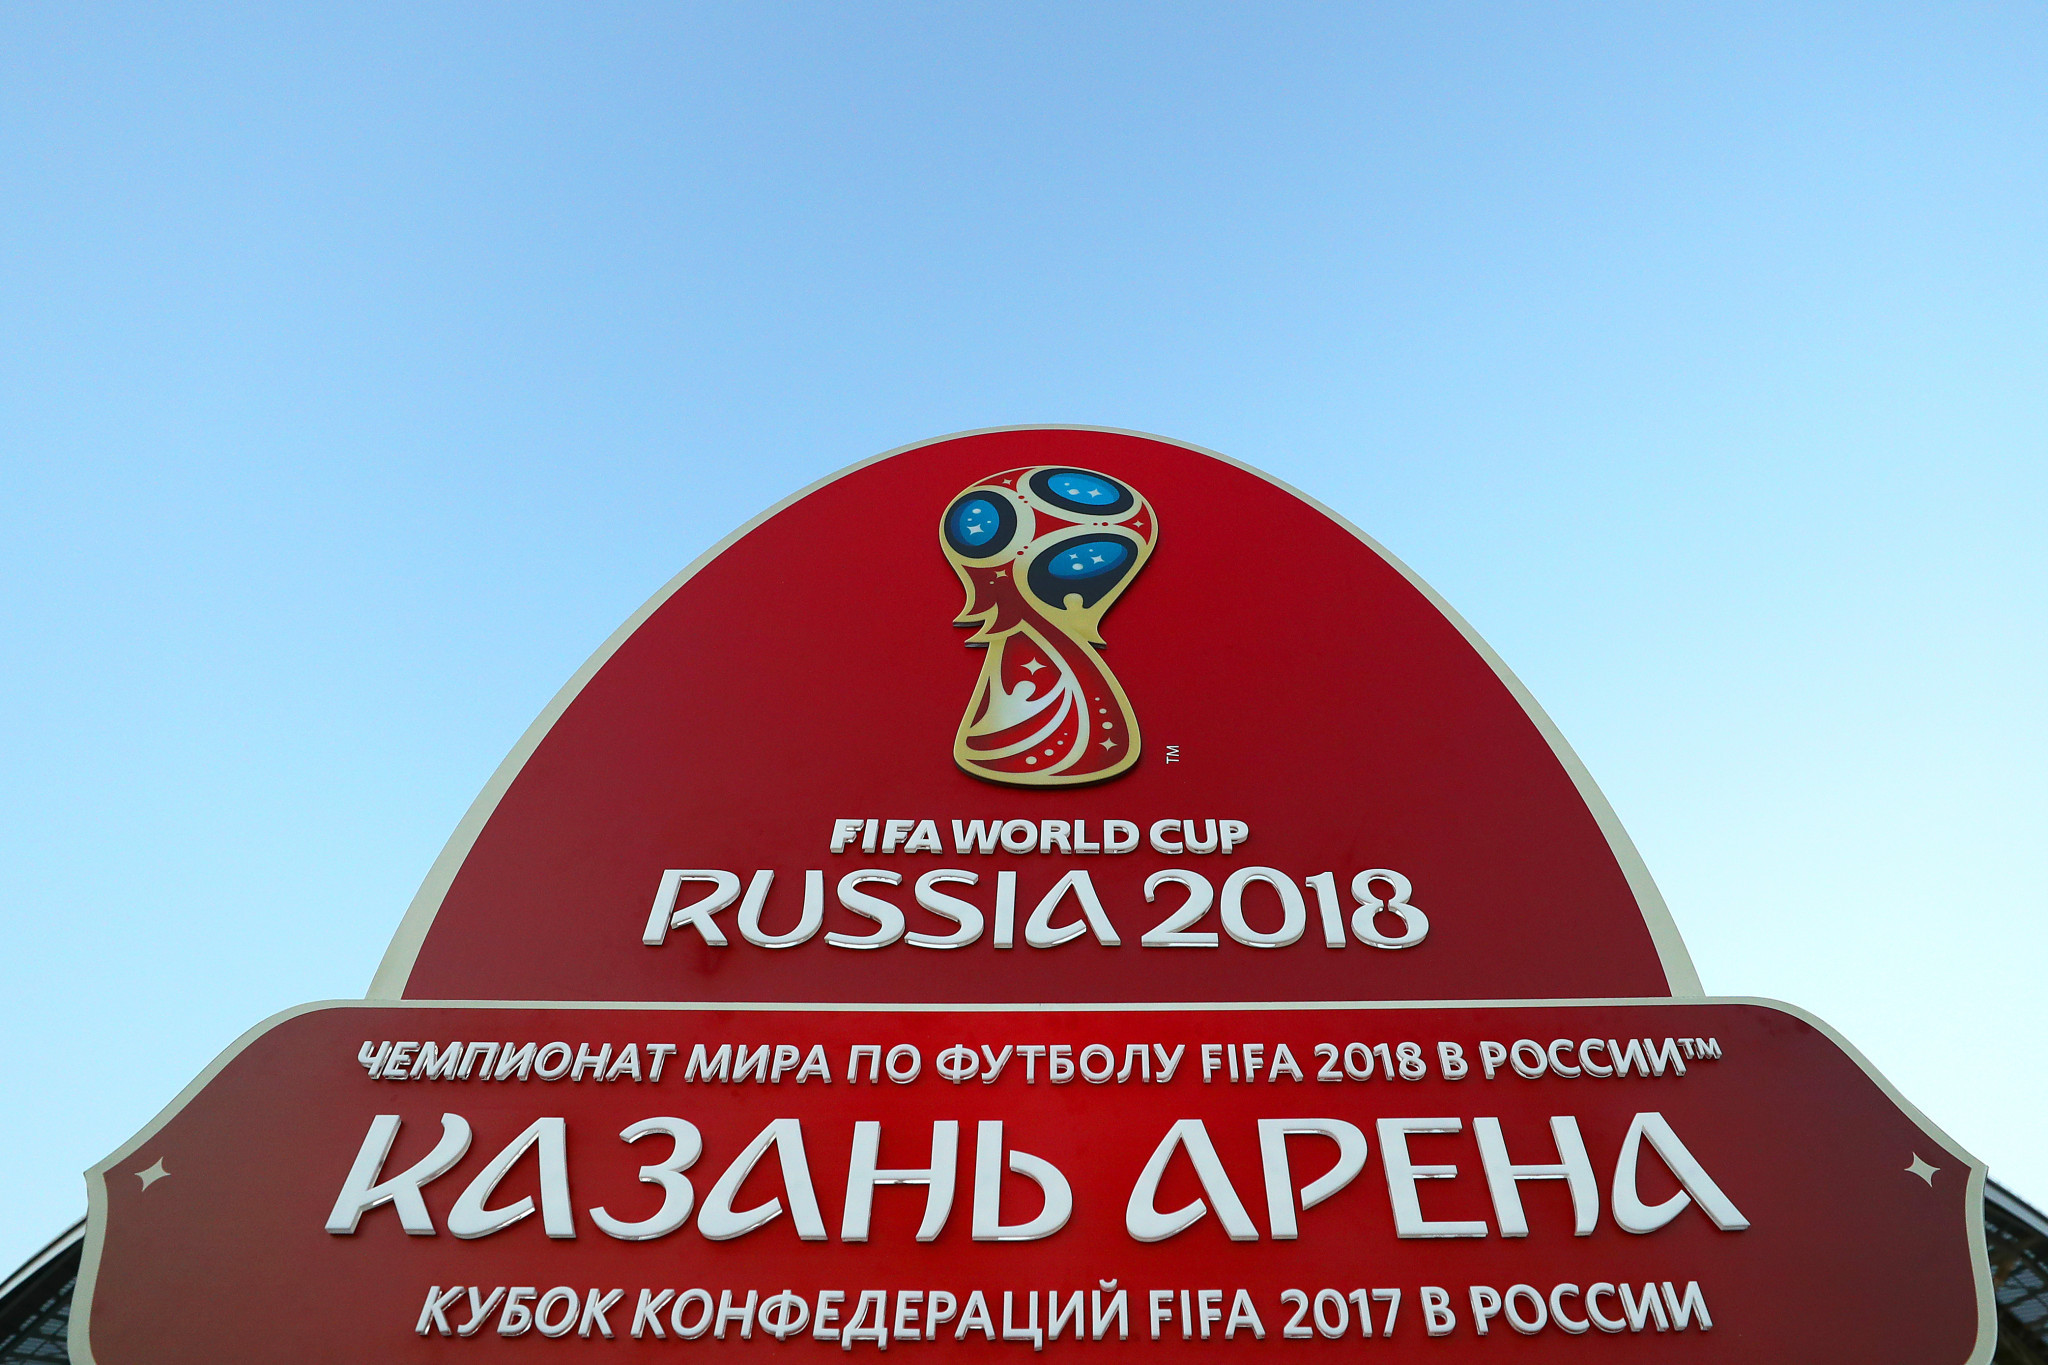 FIFA Council boosts World Cup prize money for Russia 2018